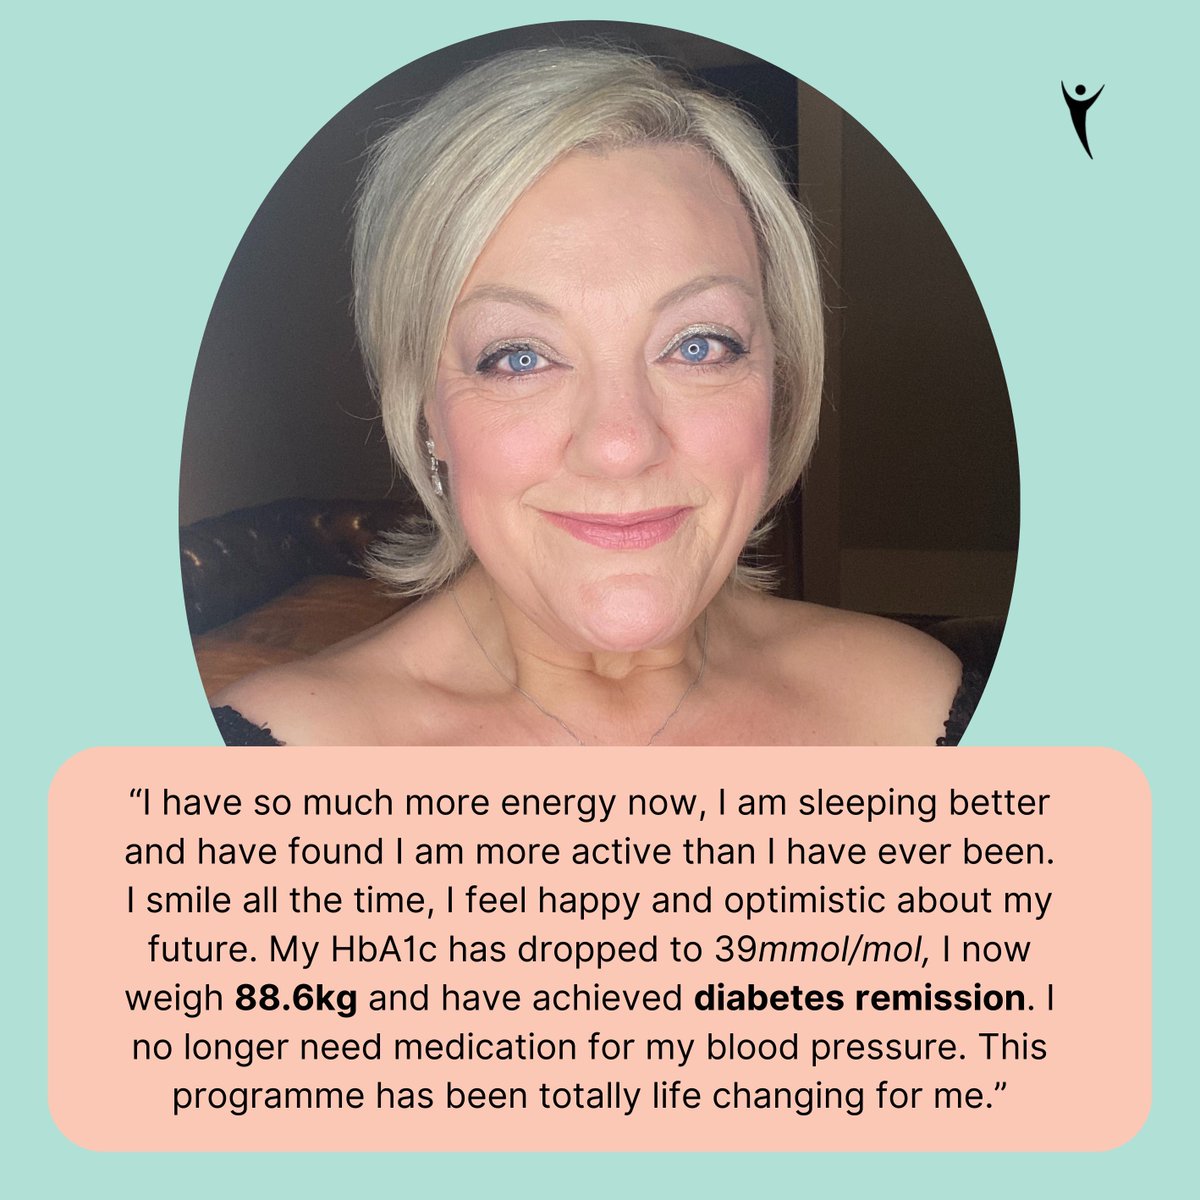 Swipe to see Jane's amazing transformation, a participant on our Type 2 Diabetes Pathway to Remission programme ➡. Jane lost over 30kg of weight and achieved diabetes remission, improving her mental wellbeing and energy levels.